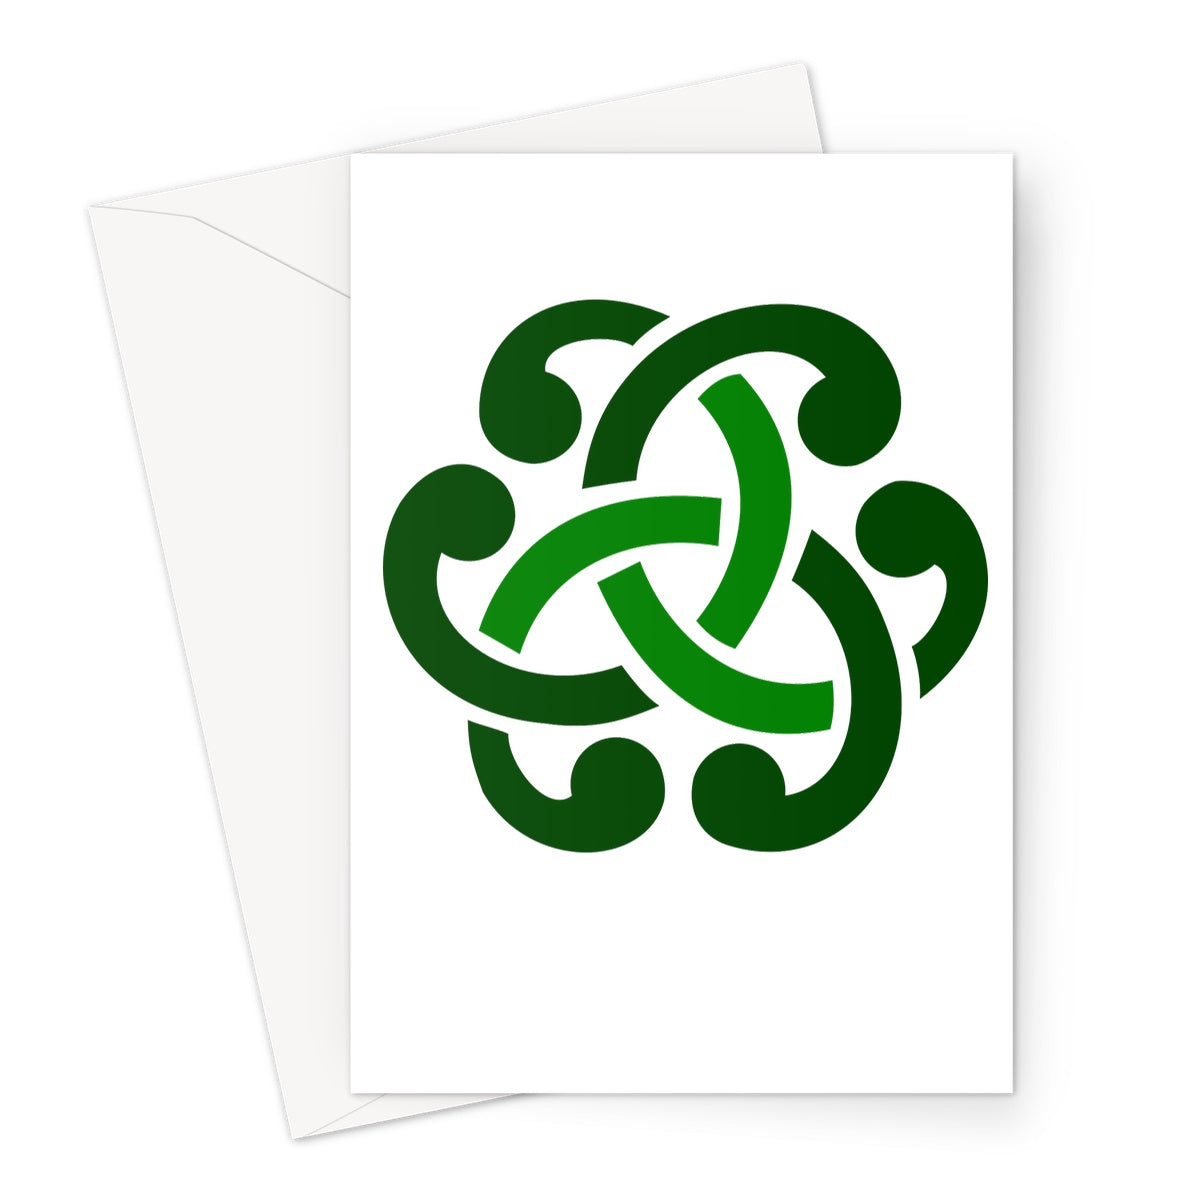 Green Celtic Knot Greeting Card